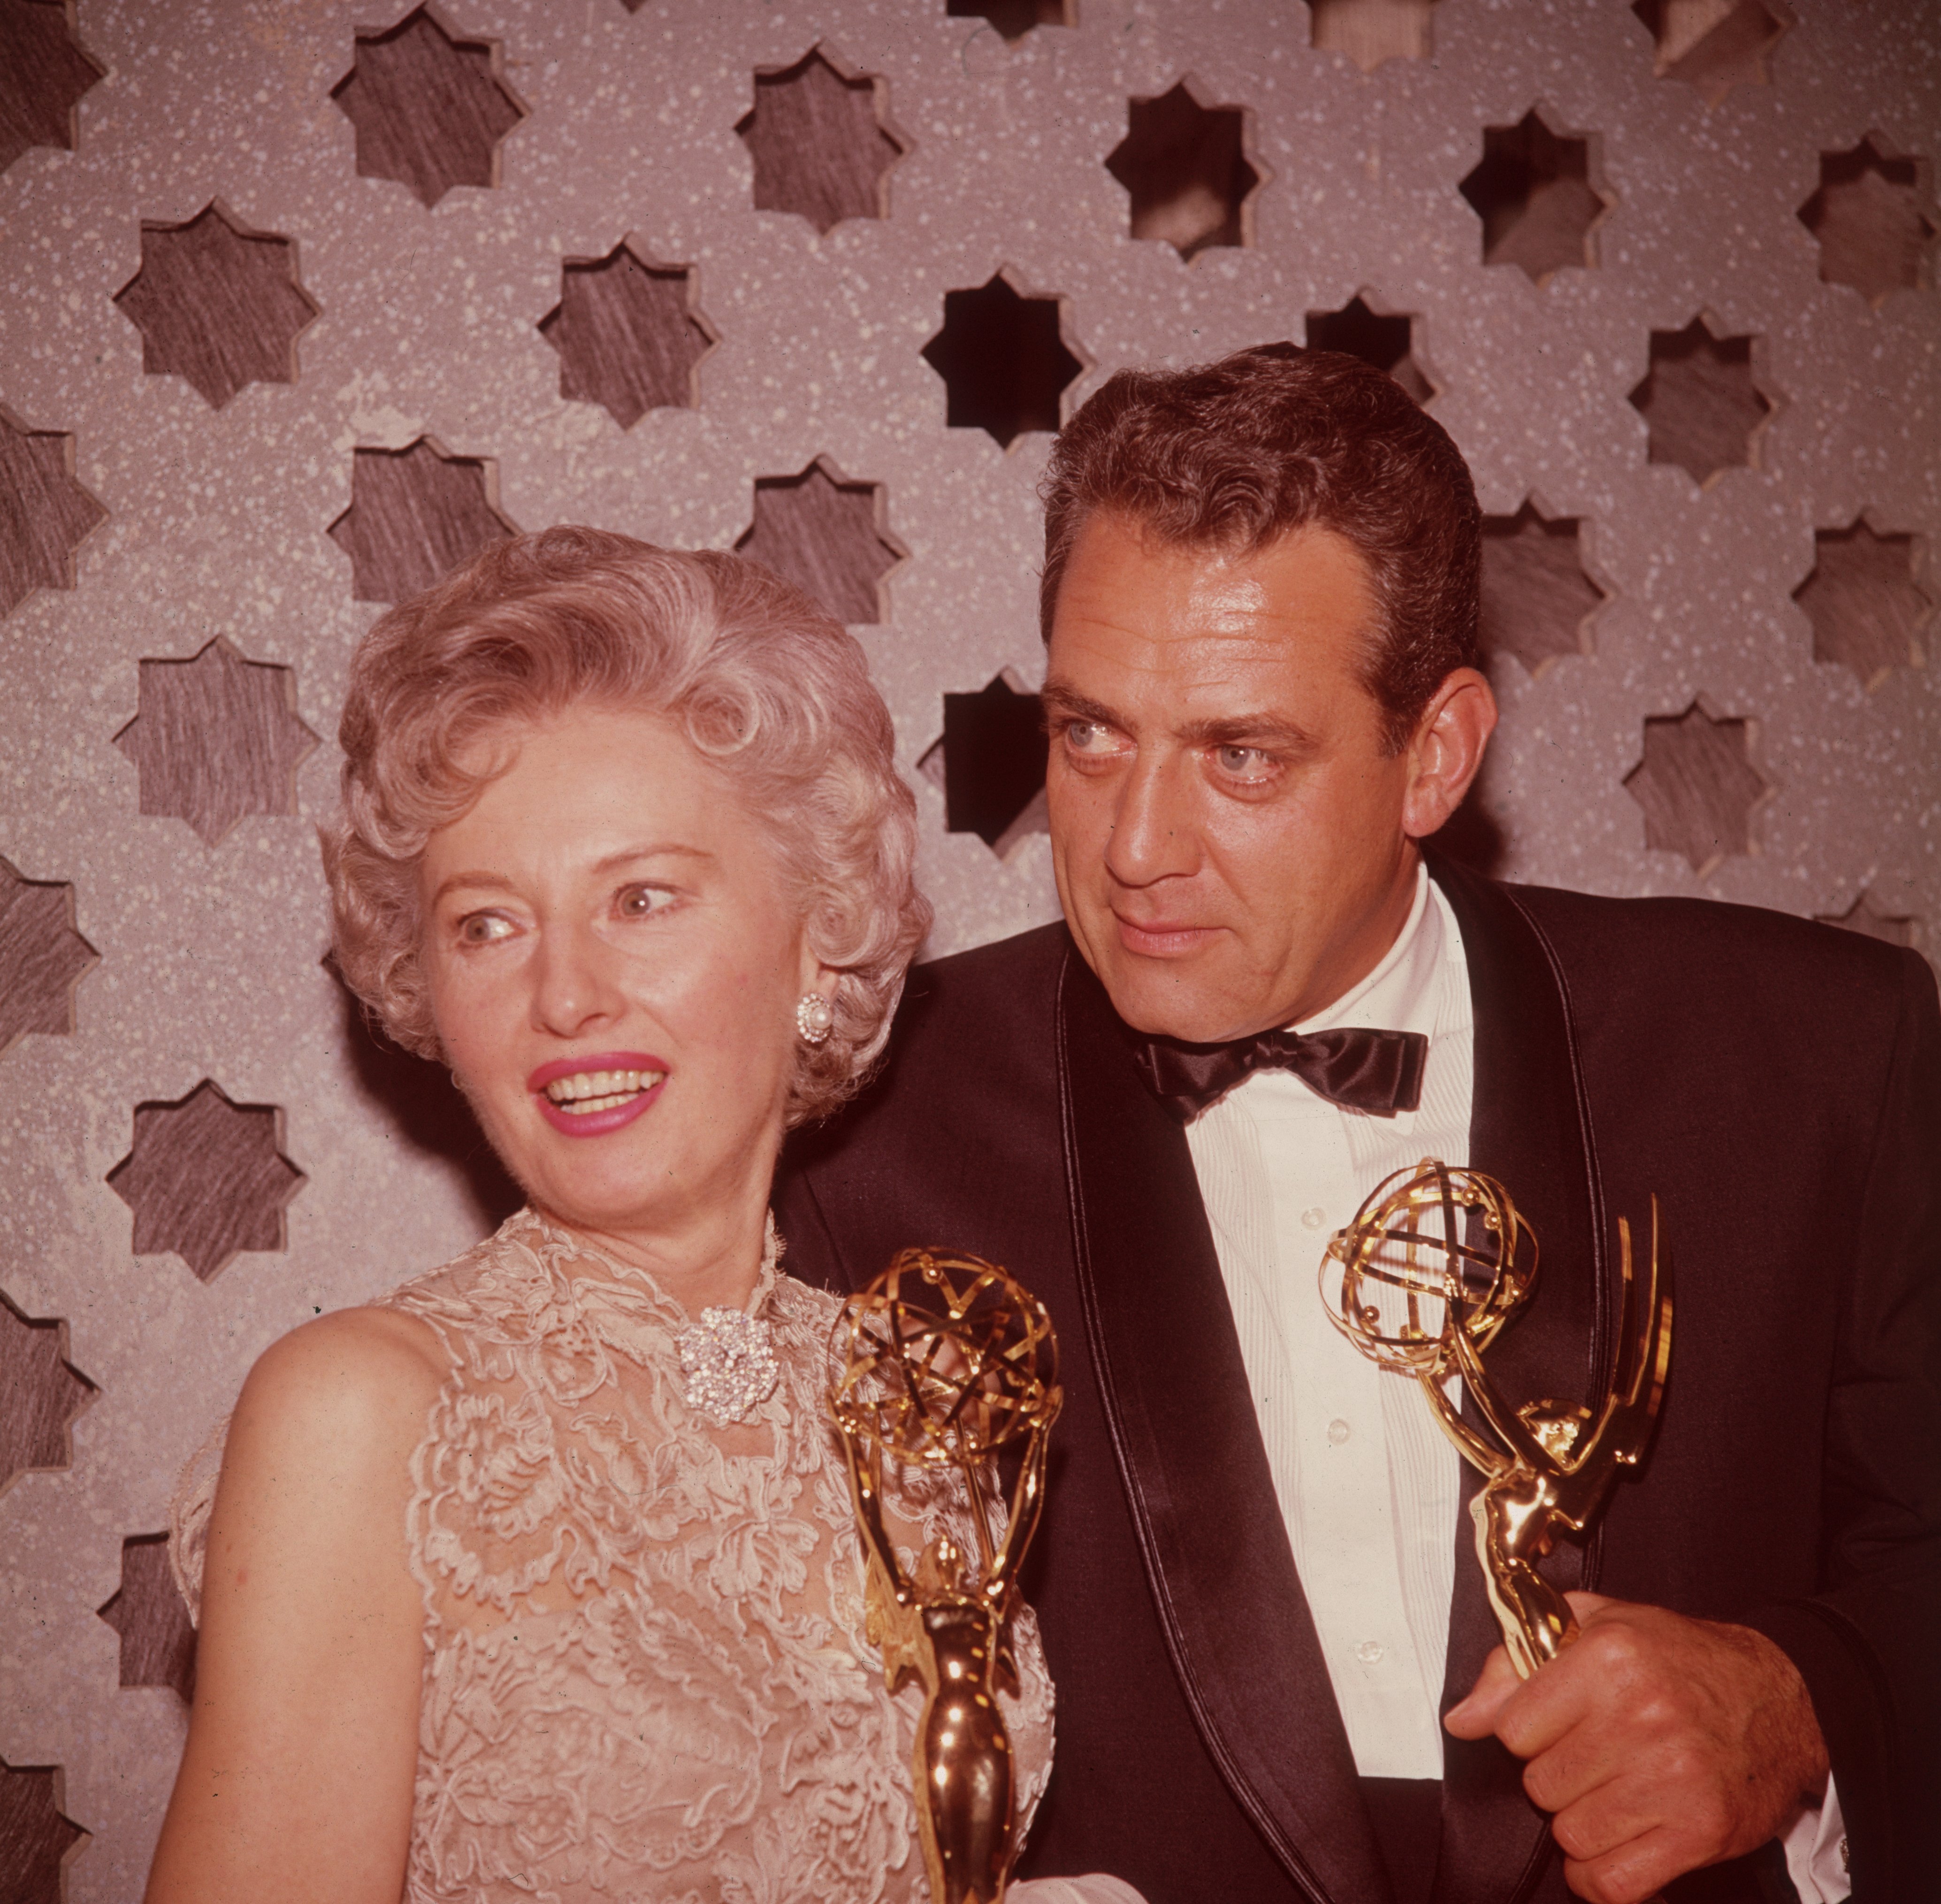 Raymond Burr and actress Barbara Stanwyck pictured holding Emmy Awards backstage in 1961. / Source: Getty Images